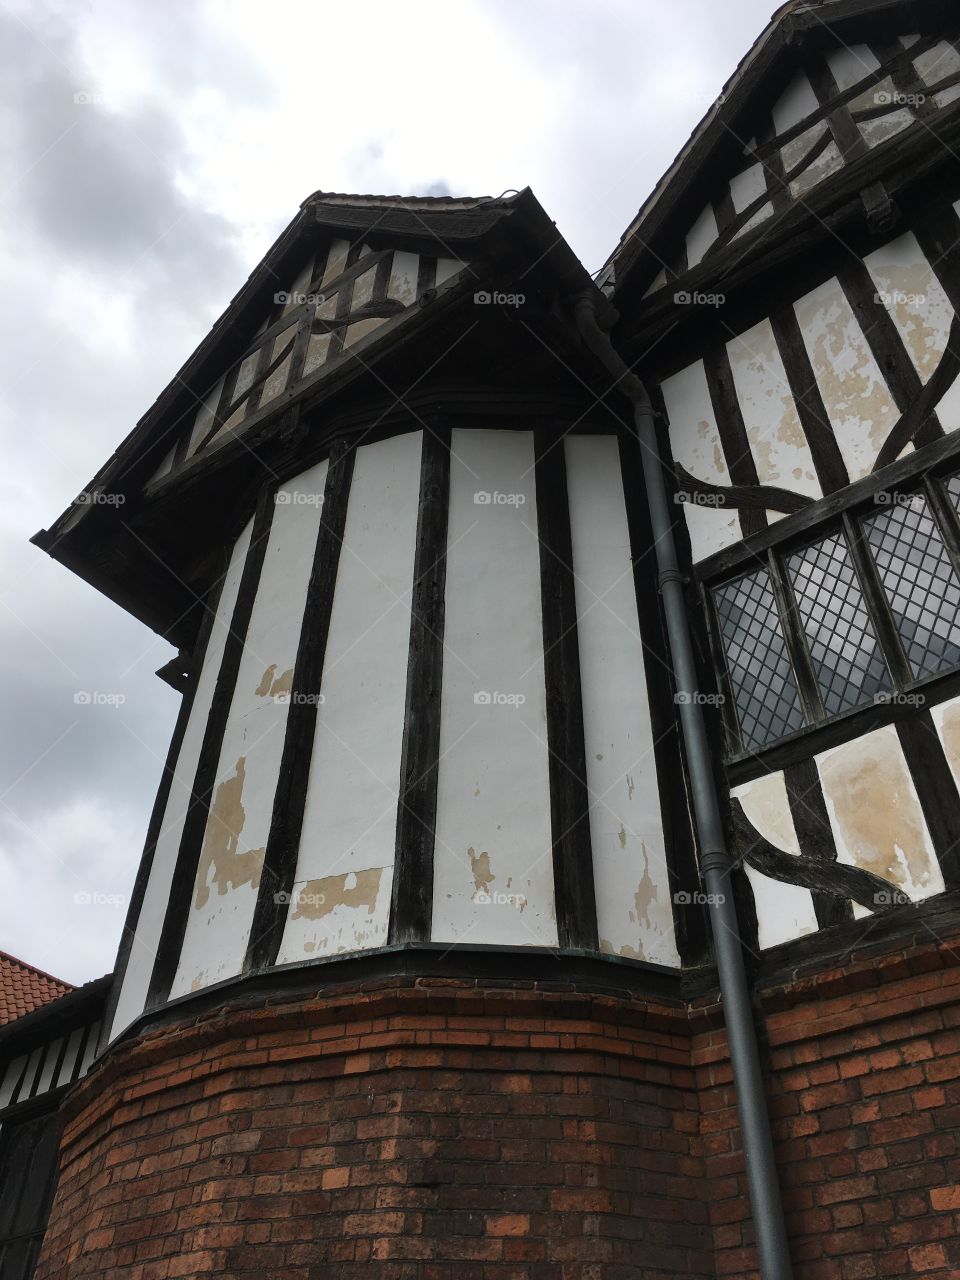 Exterior view of timber framing and windows of the mediaeval Manor House of Gainsborough Old Hall in England